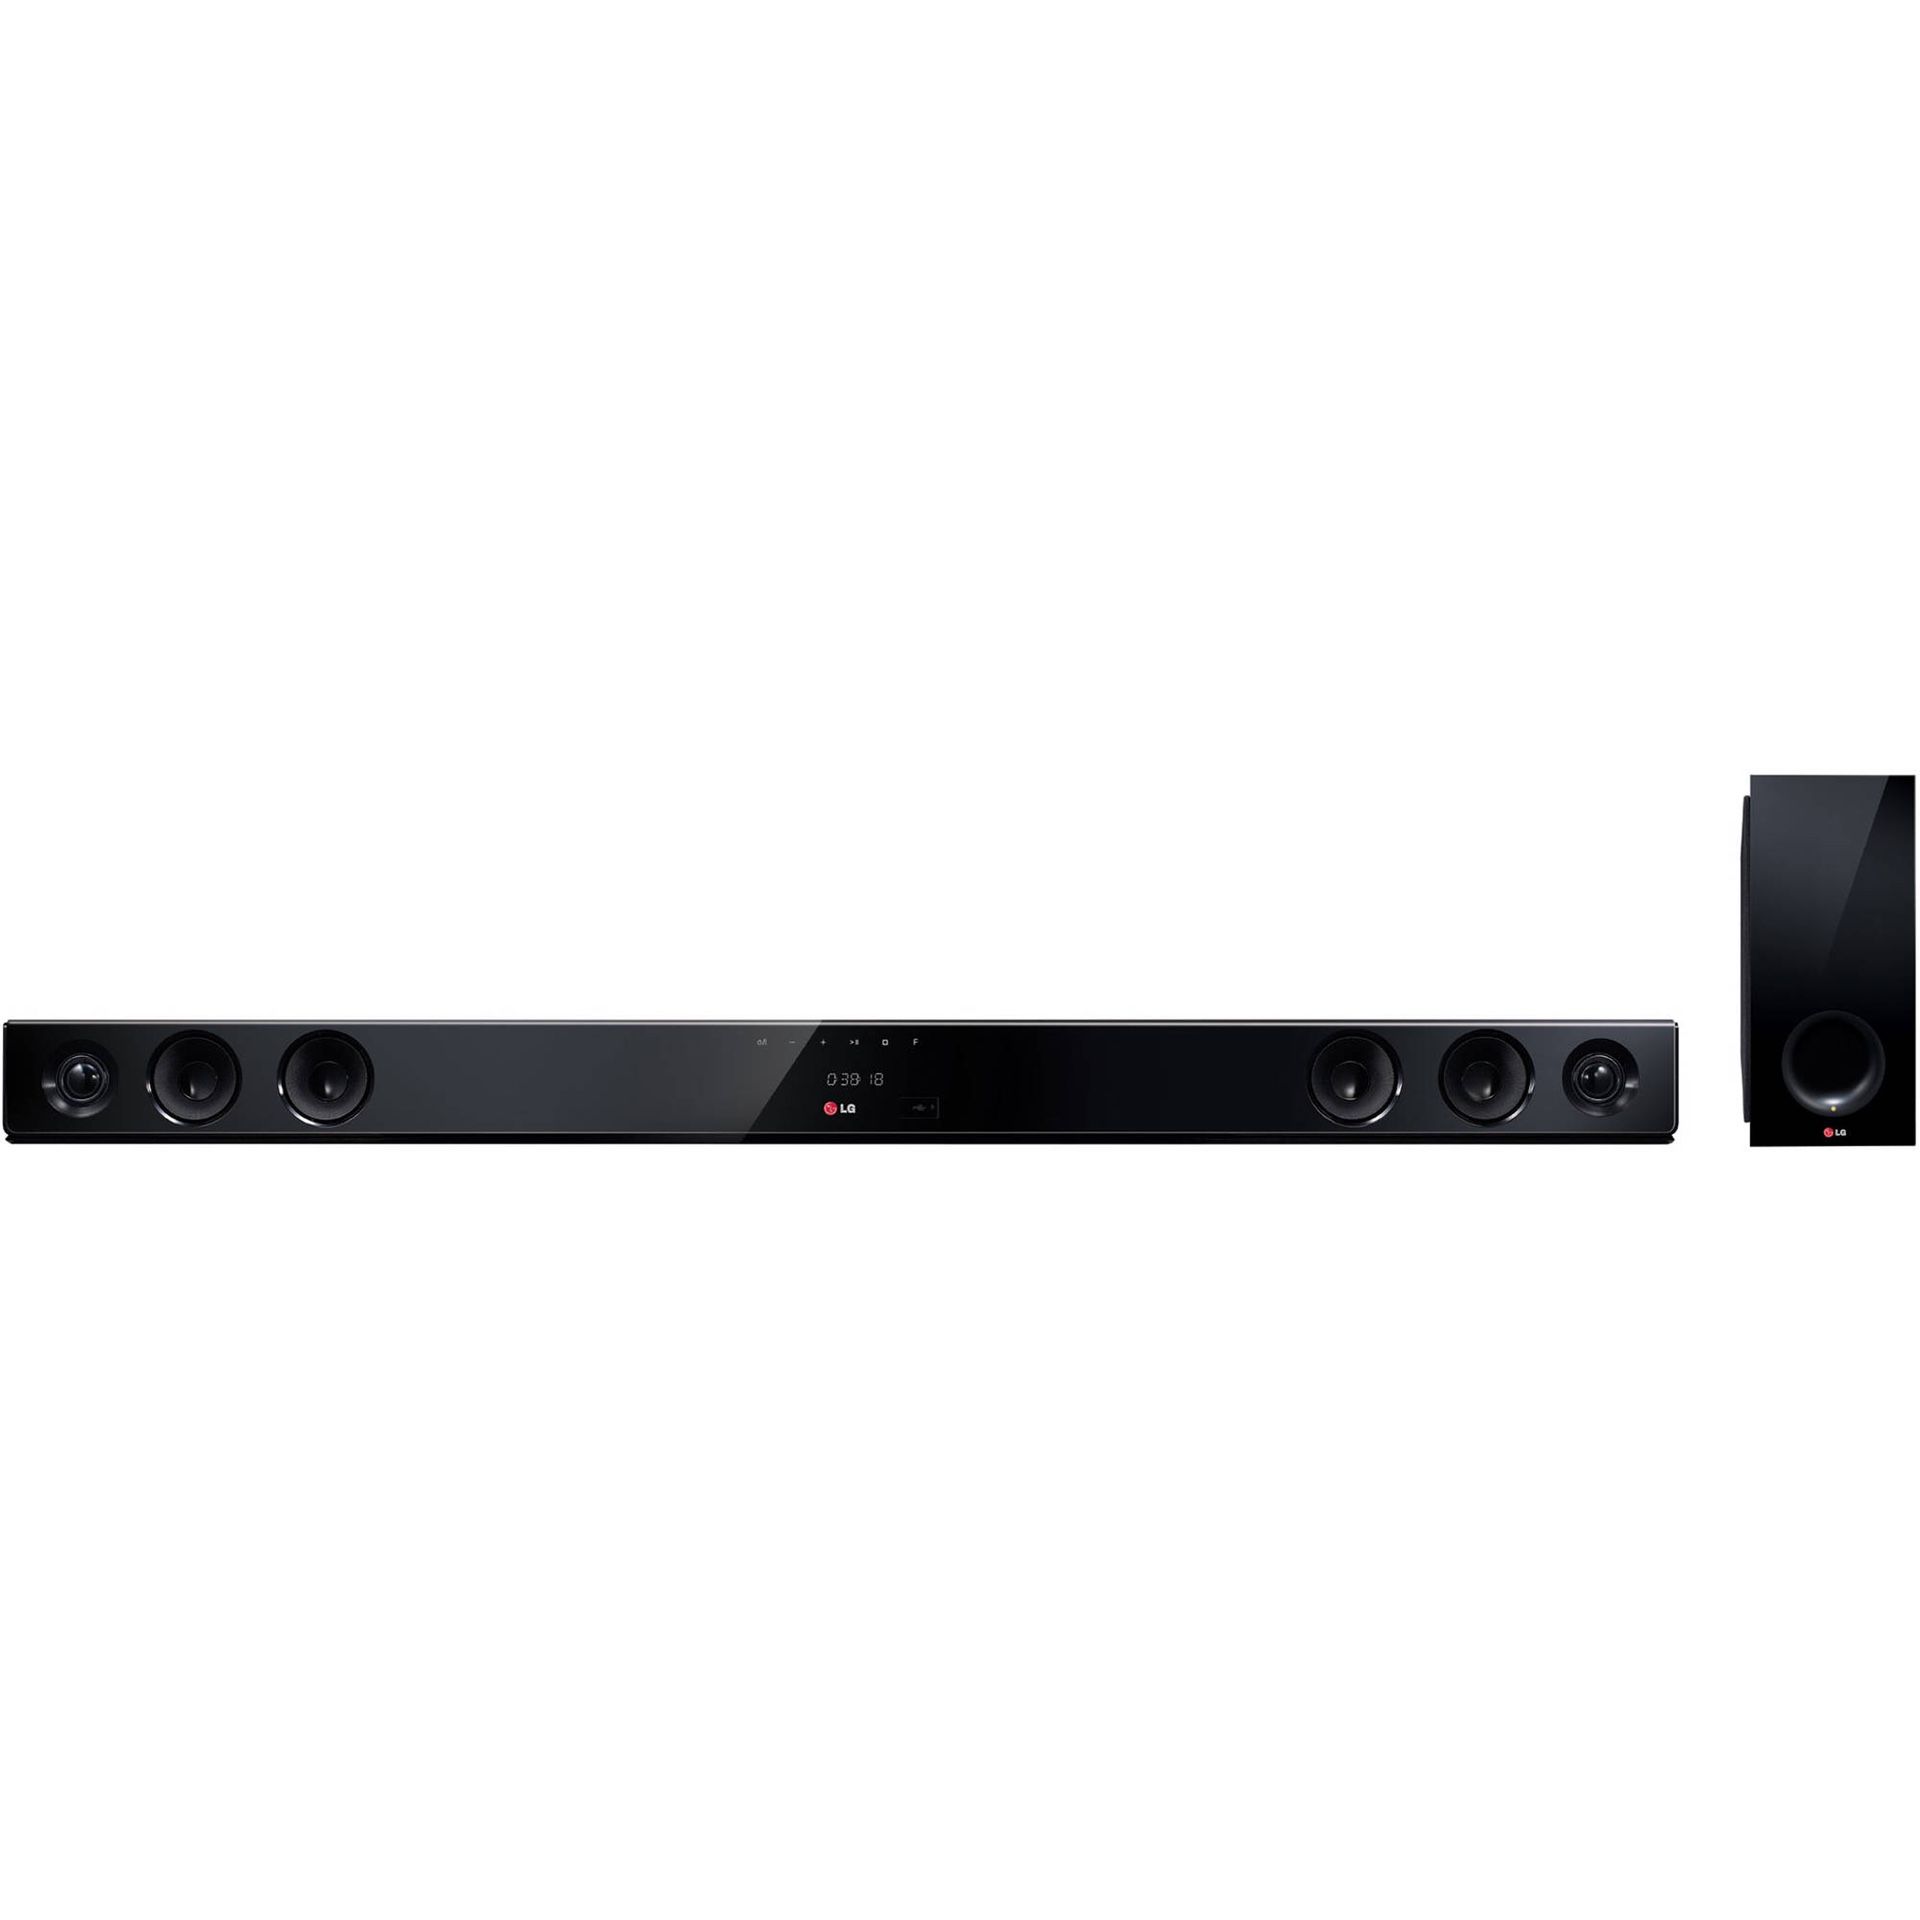 LG NB3530A 300W 2.1-Channel Sound Bar with Wireless Subwoofer